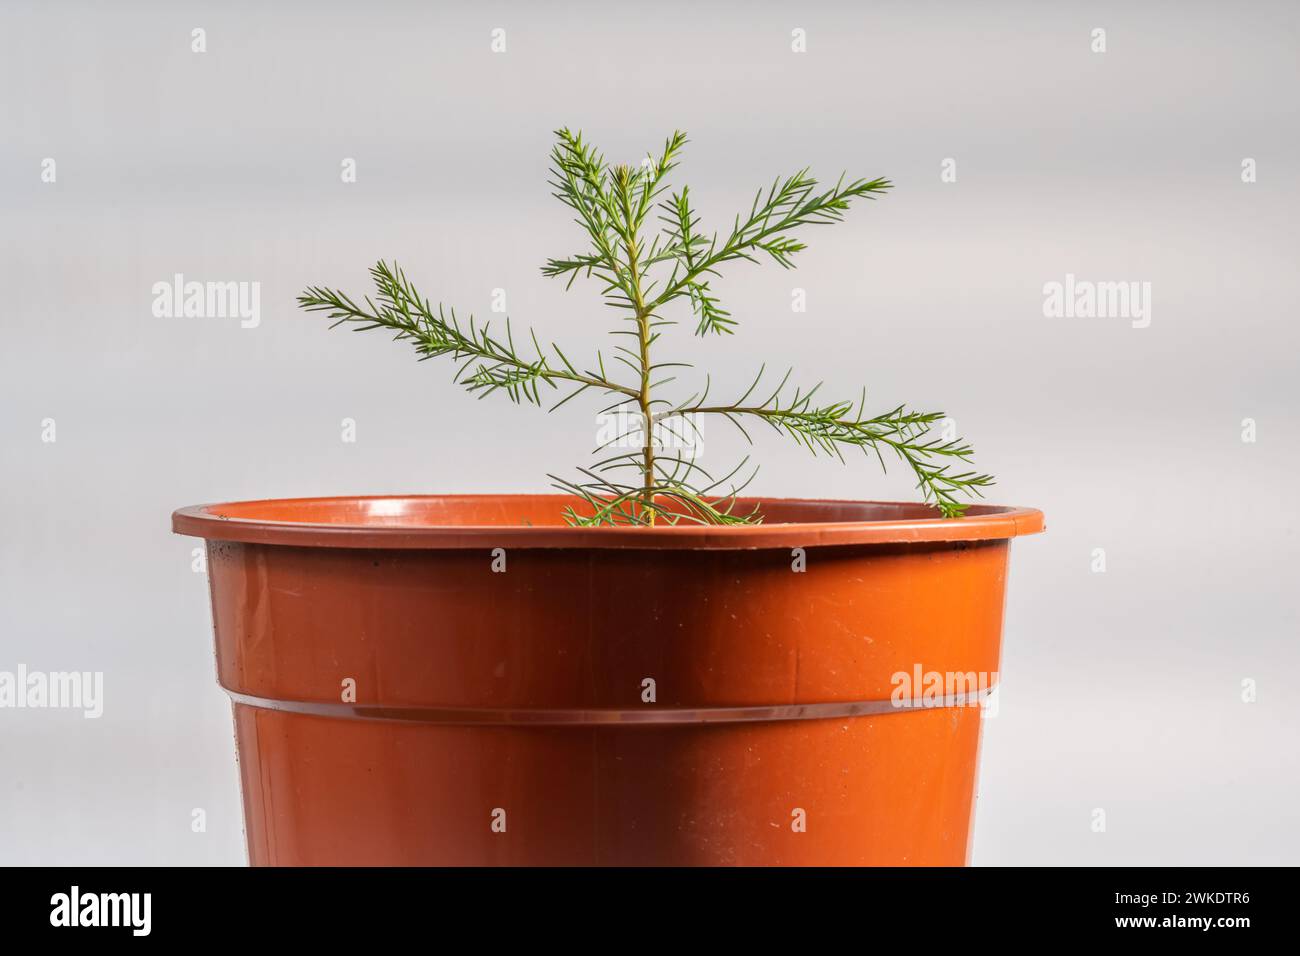 one year old giant sequoia tree isolated in the pot, growing Sequoiadendron giganteum at home Stock Photo